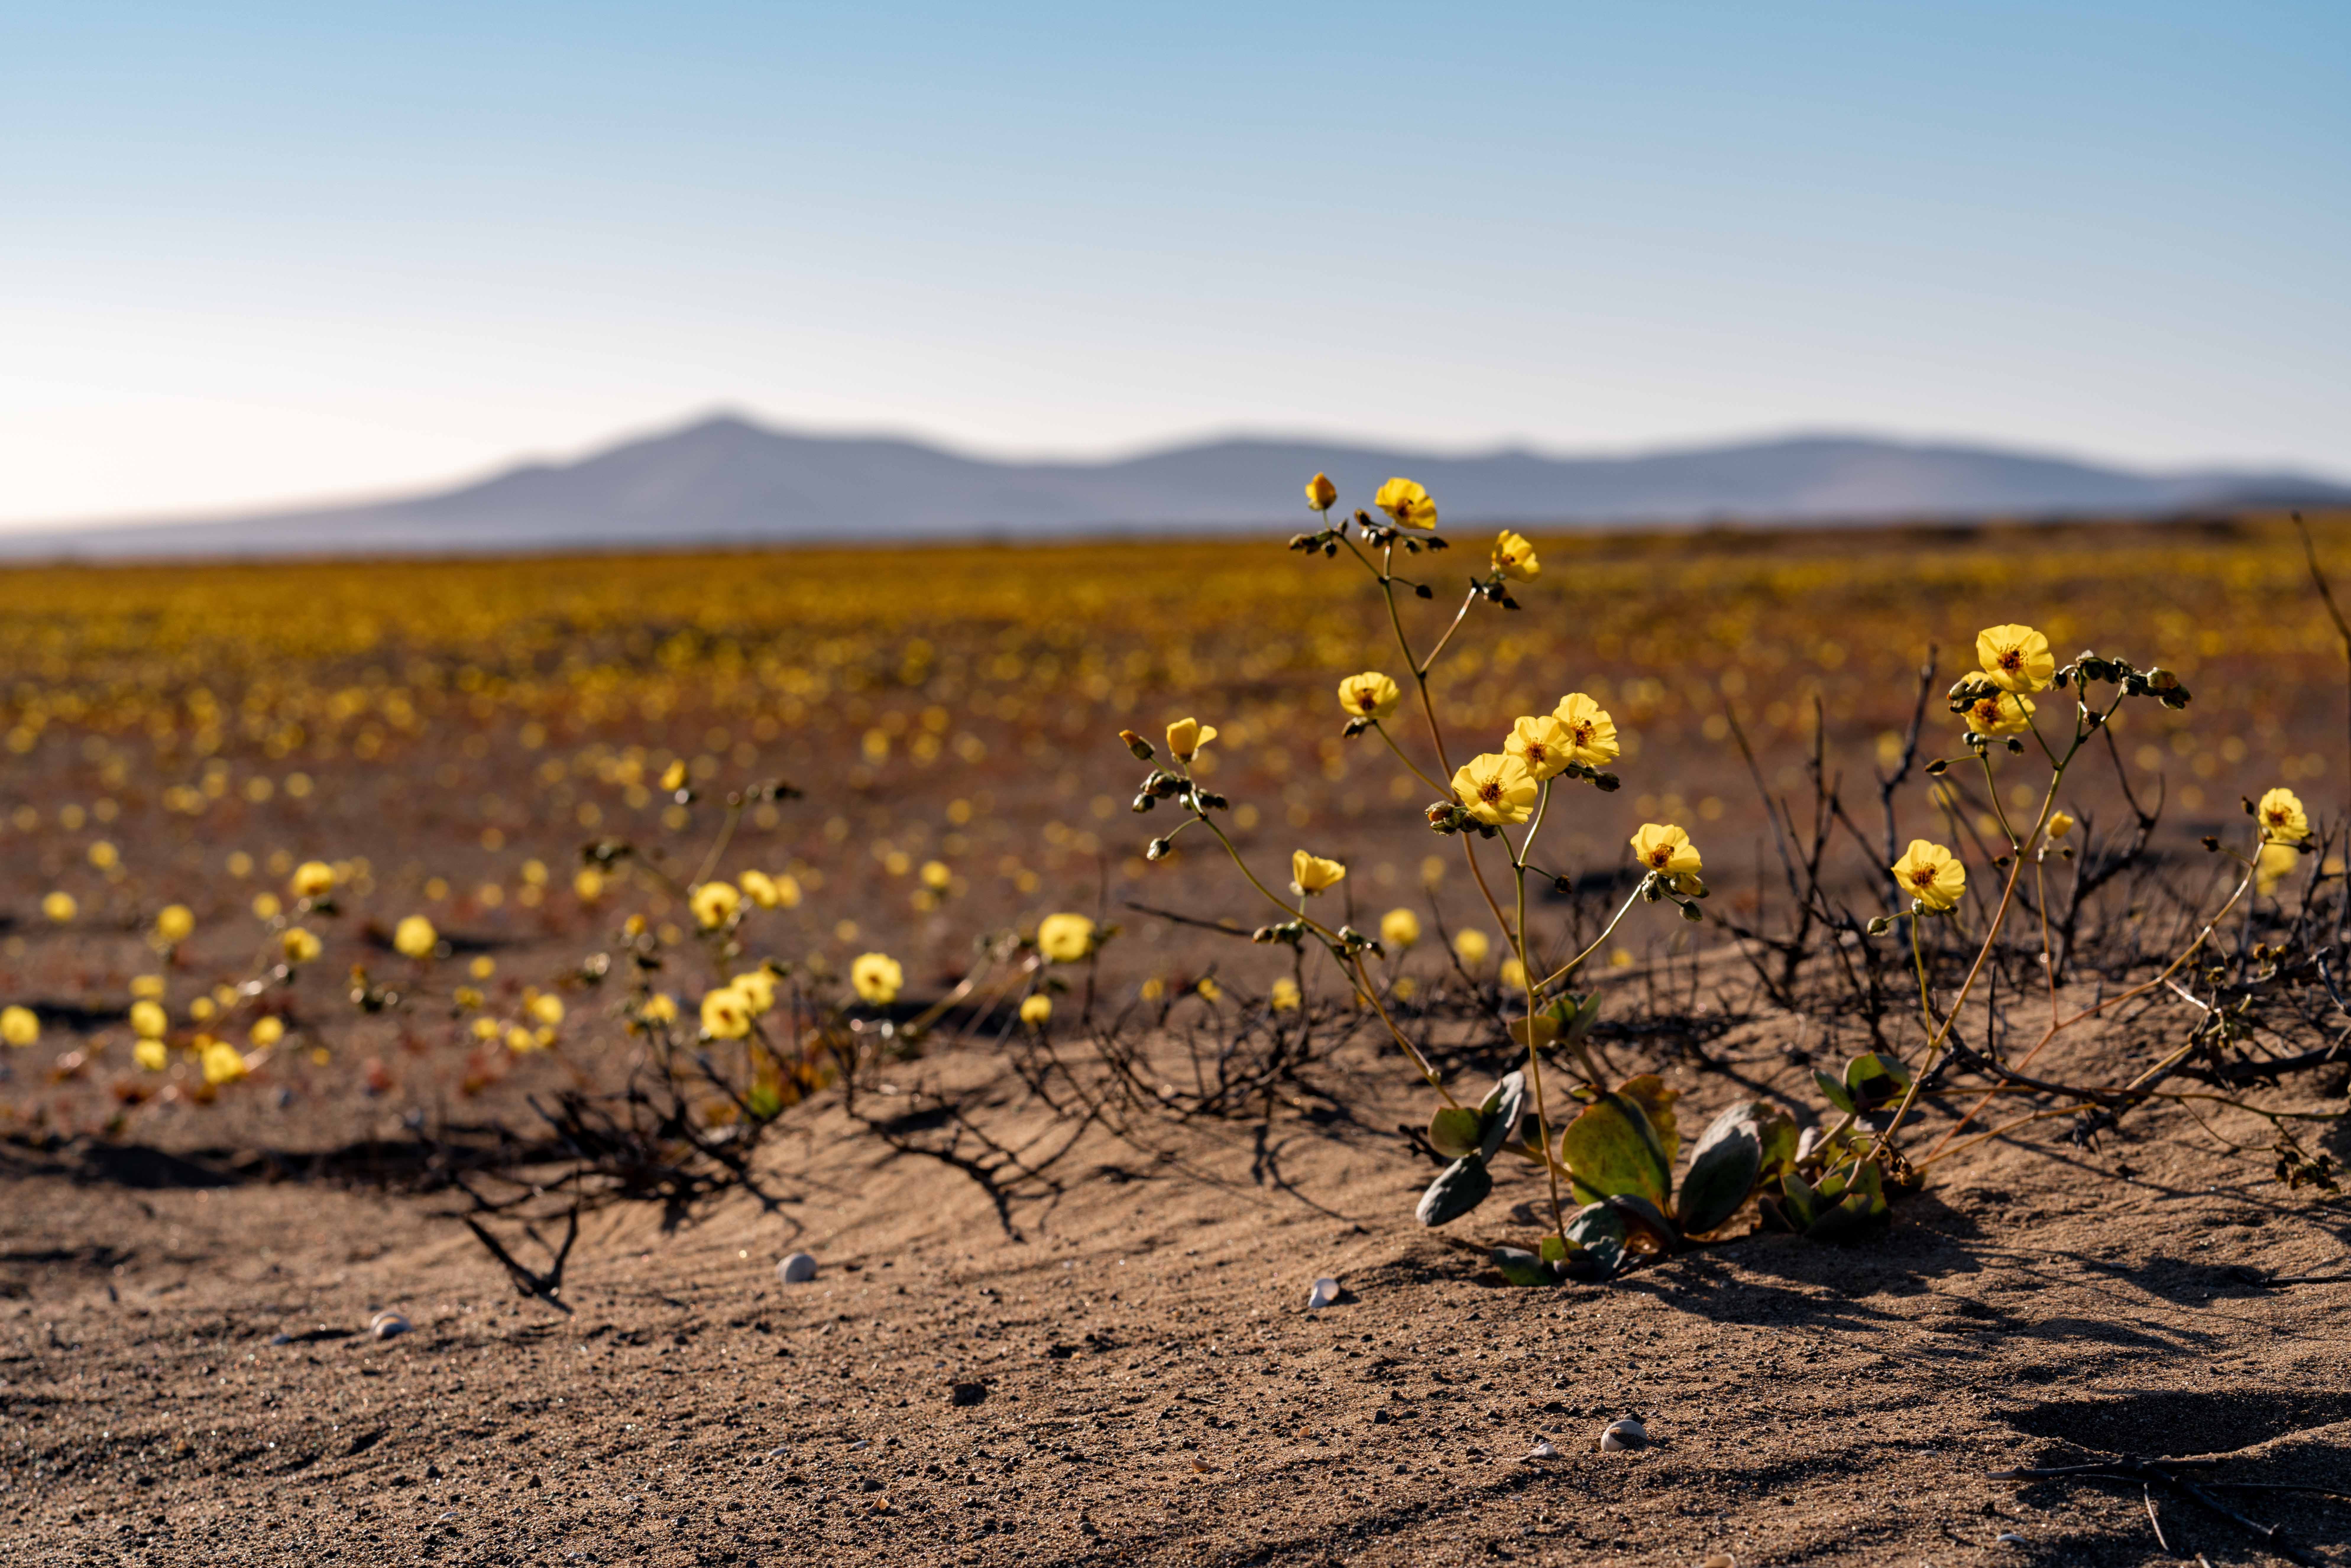 Yellow flowers in the desert. (Photo: Alex Fuentes, Getty Images)